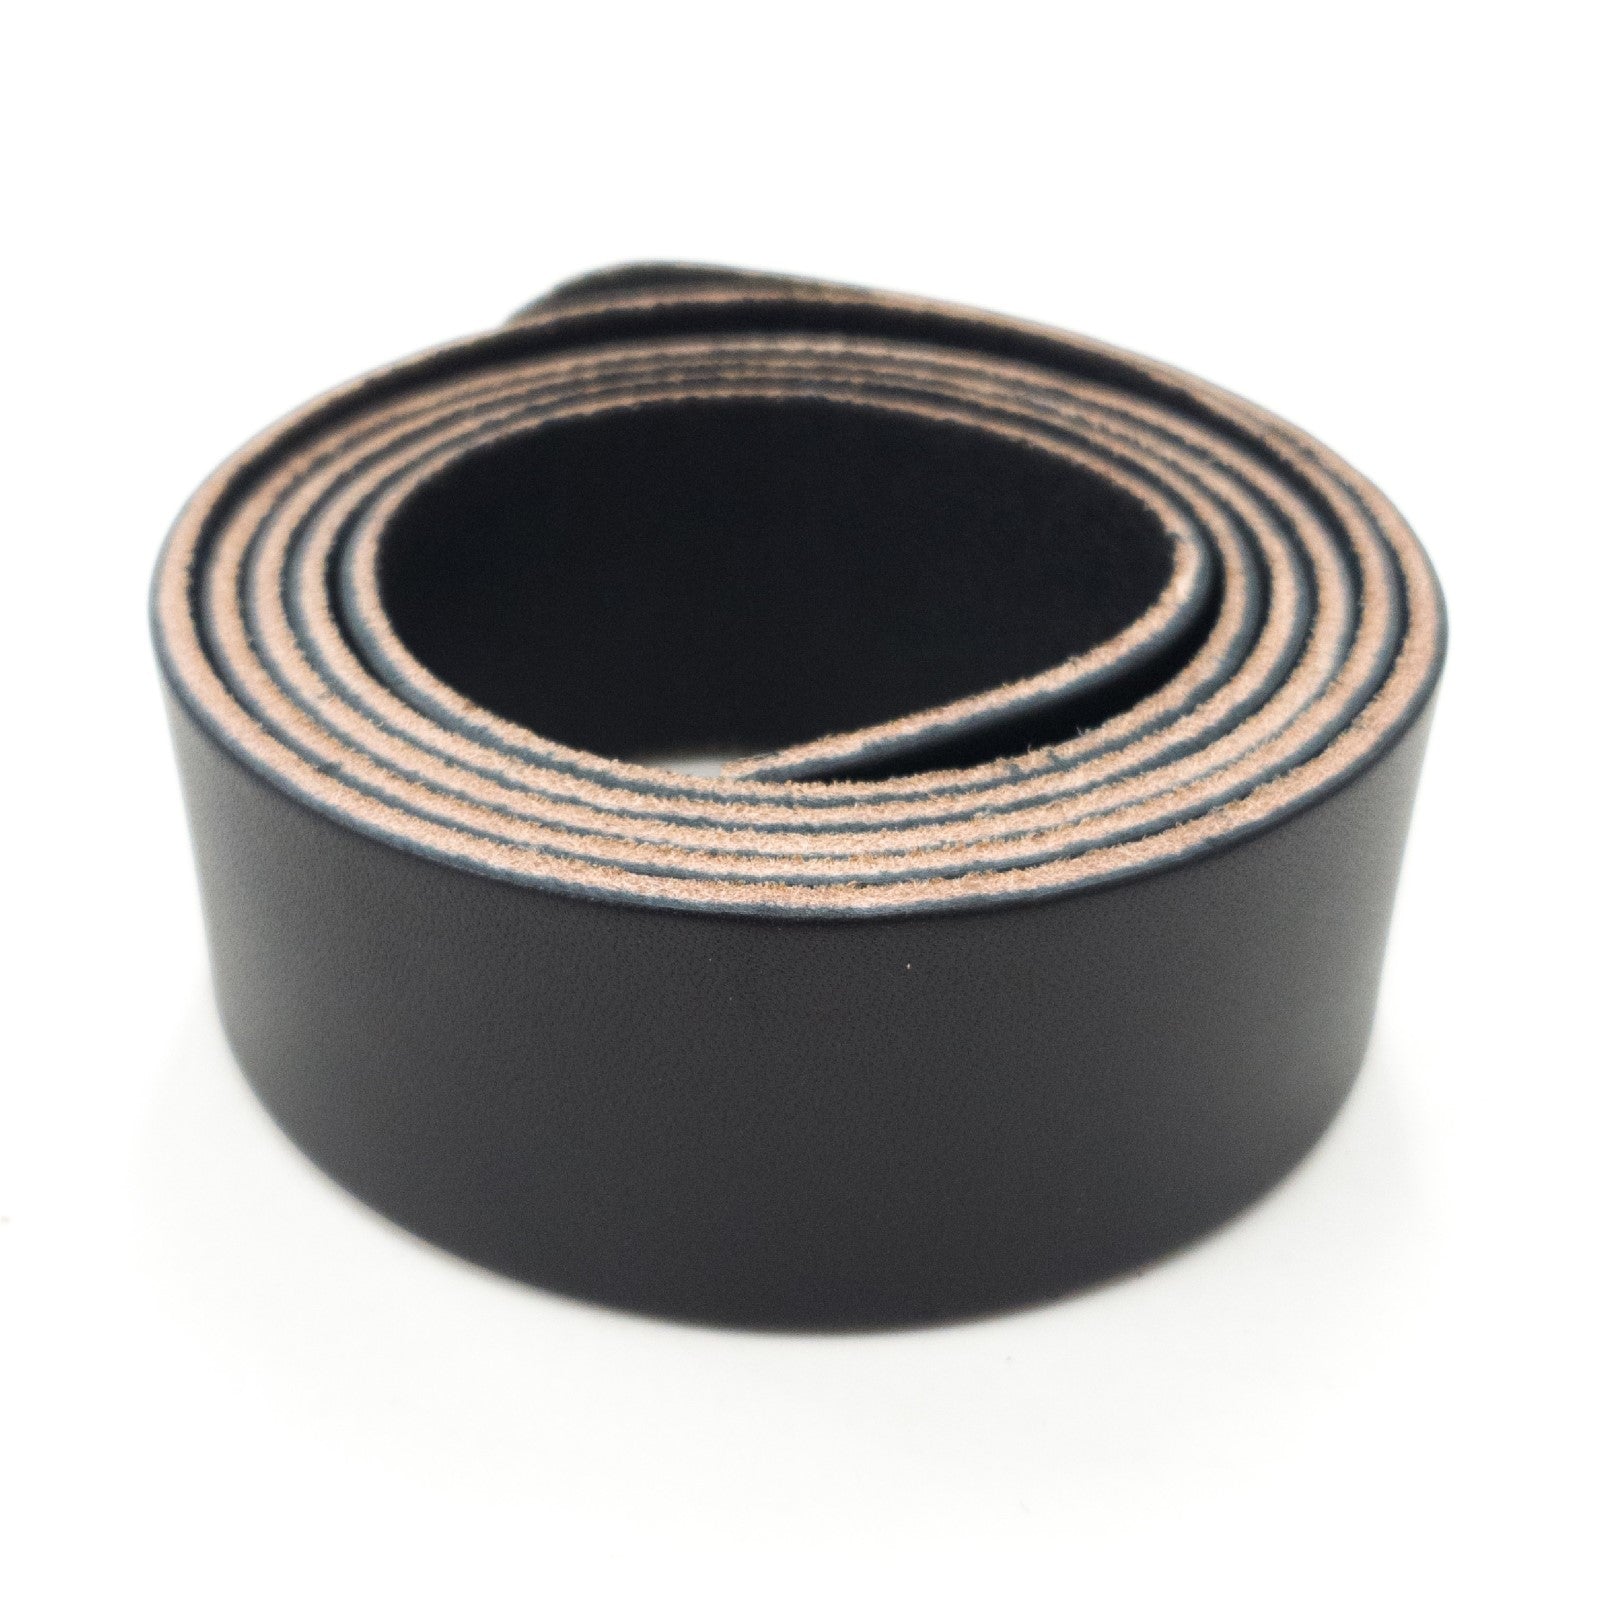 Belt Blank Seconds, Black / 1 3/8 / 6-7 | The Leather Guy